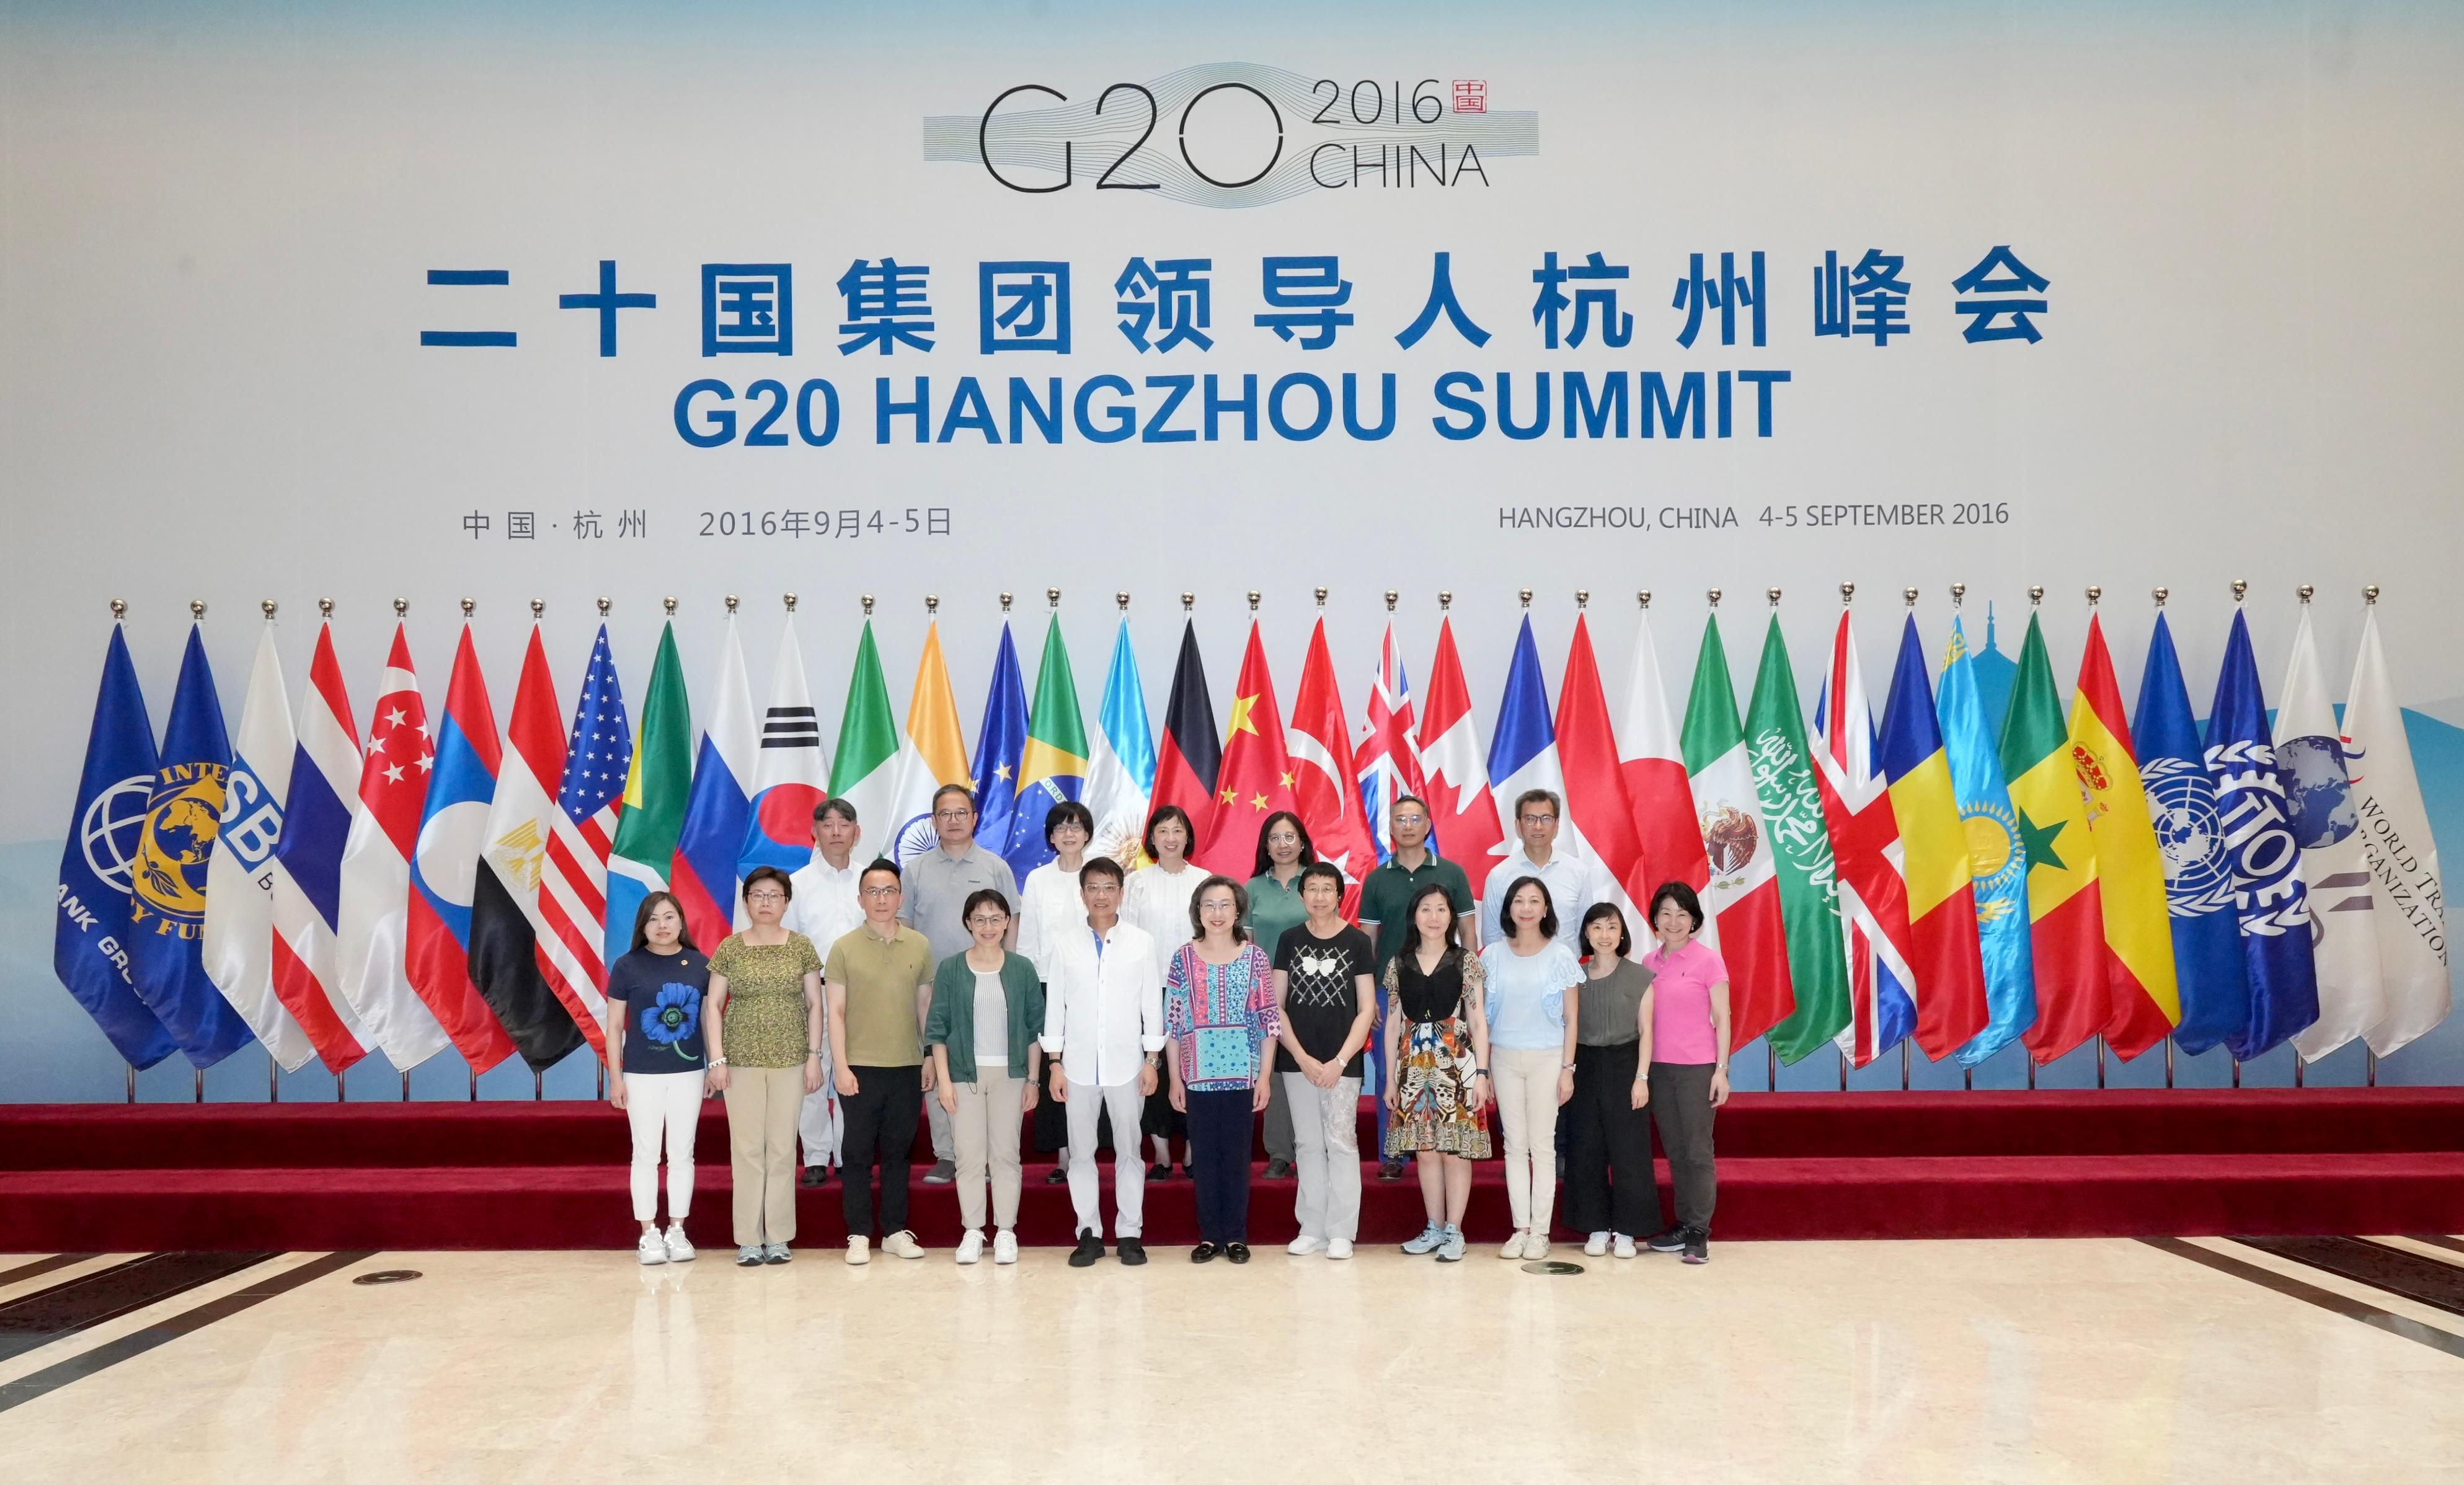 The delegation of Permanent Secretaries and Heads of Departments of the Hong Kong Special Administrative Region Government on a study and duty visit took a group photo at the Hangzhou International Expo Center this afternoon (June 29). The centre is the venue for the G20 Hangzhou Summit and also one of the venues for the 19th Asian Games Hangzhou.